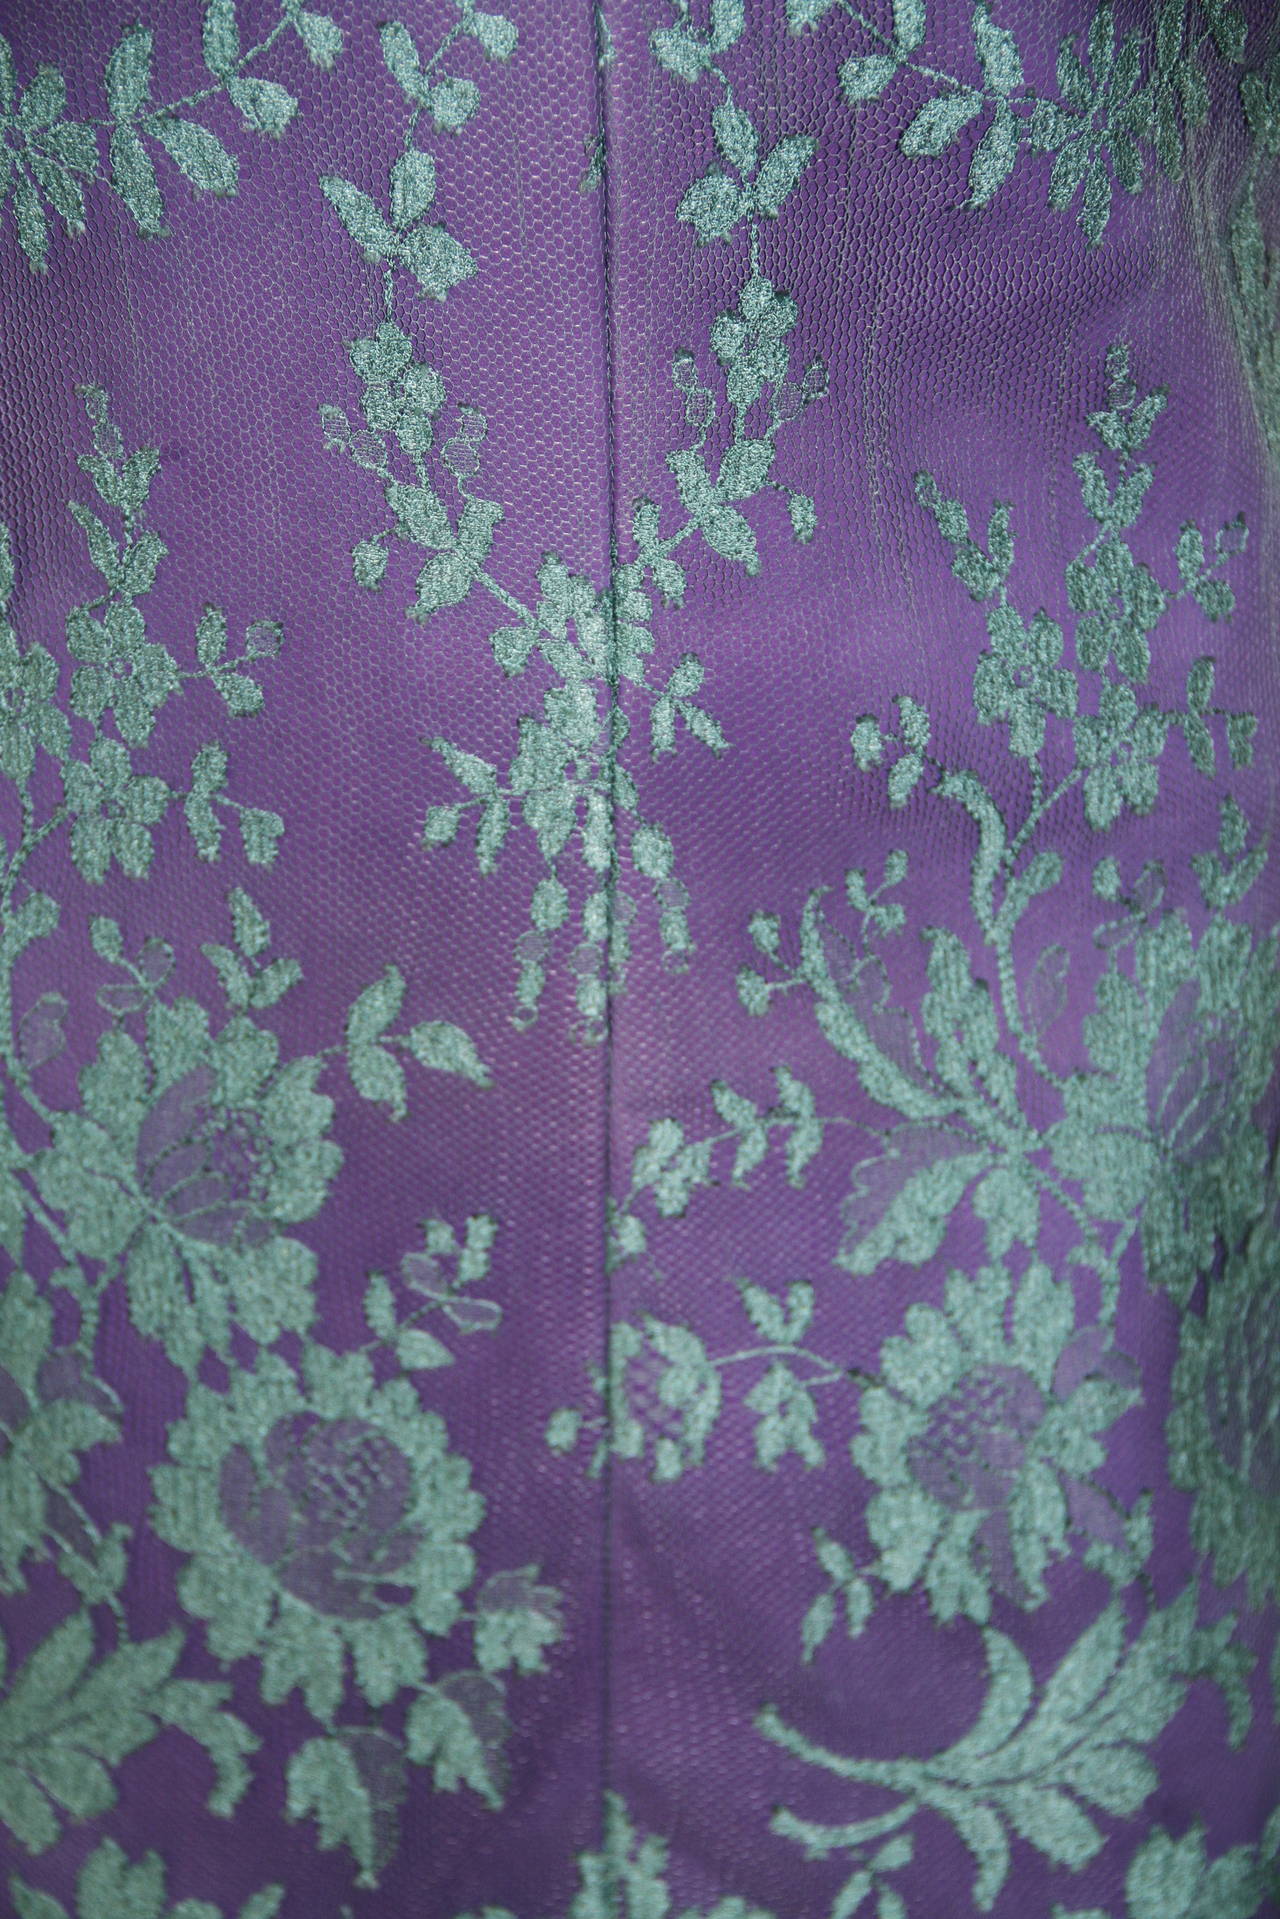 Gianni Versace purple leather fitted cocktail dress, with lace net overlay from 1996. The dress features metal and paste Medusa embossed strap detailing.

Unmarked, however, sizing is equivalent to an Italian size 40.

Manufacturer - Ruffo S.p.a.